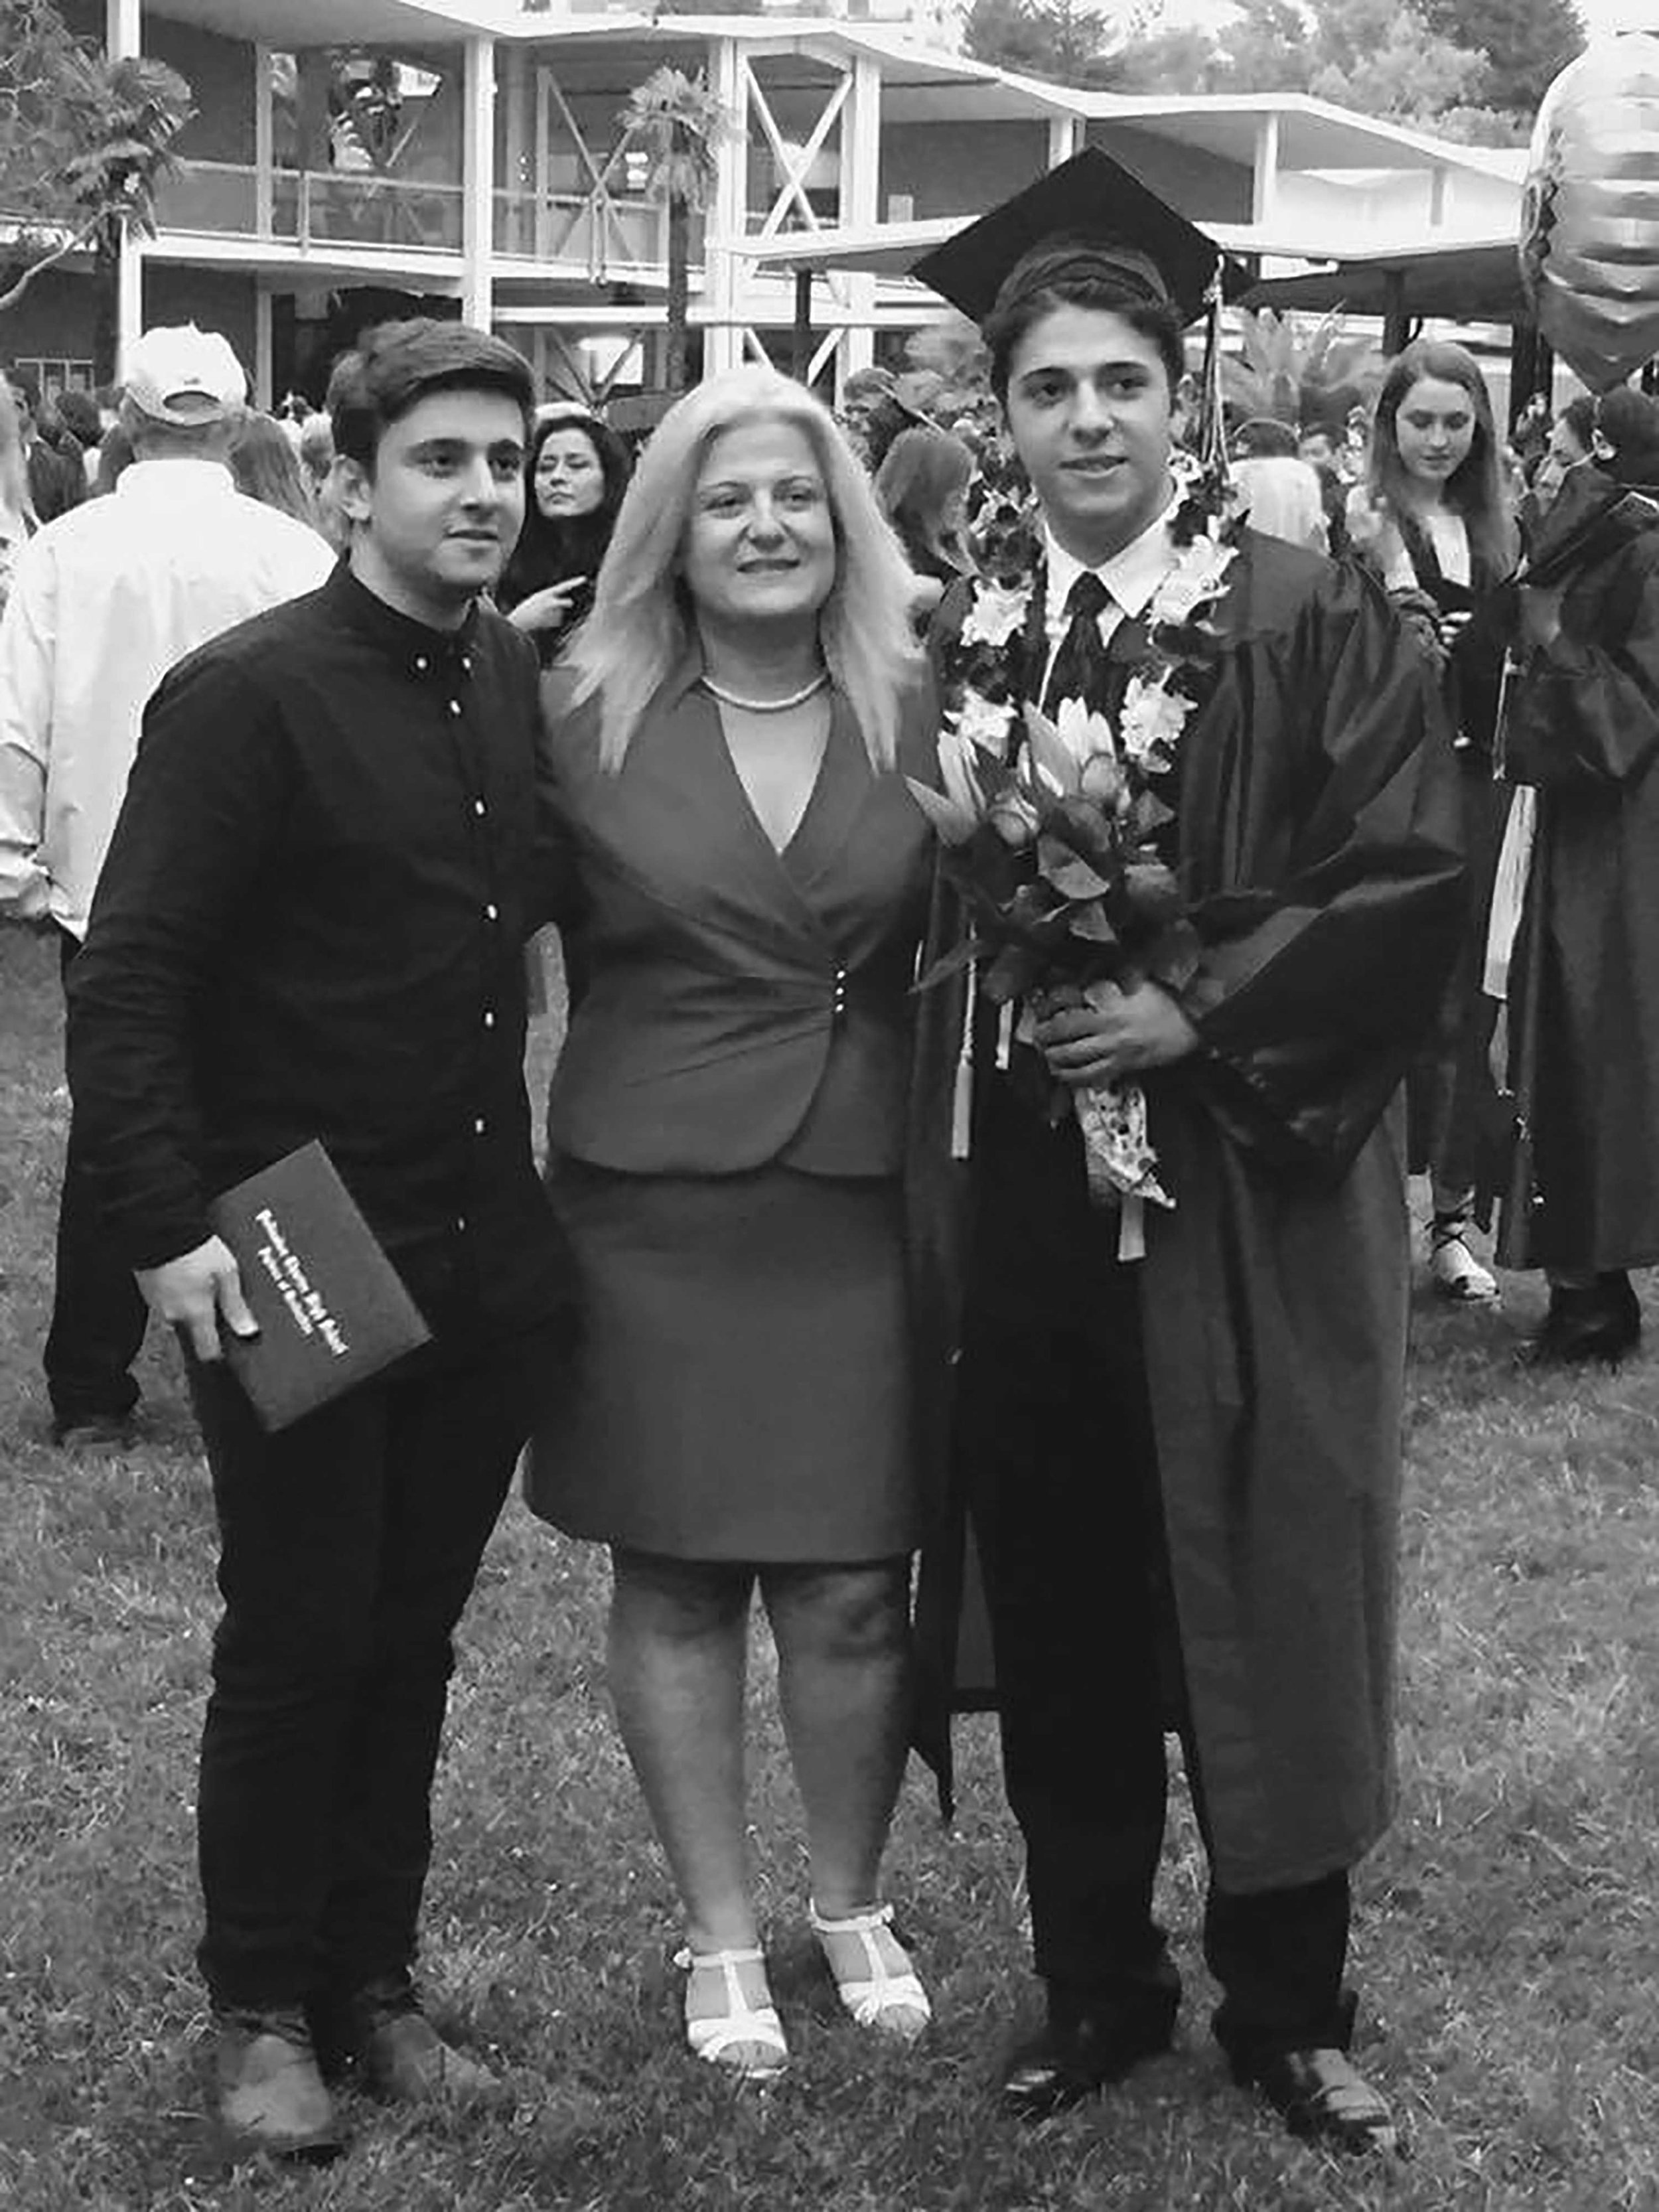  Faten Safadi (center) embraces her sons Wail Safadi (Left) and William Safadi (right) during William’s High School graduation from Pacific Palisades High School in June of 2016 in Pacific Palisades, CA. 